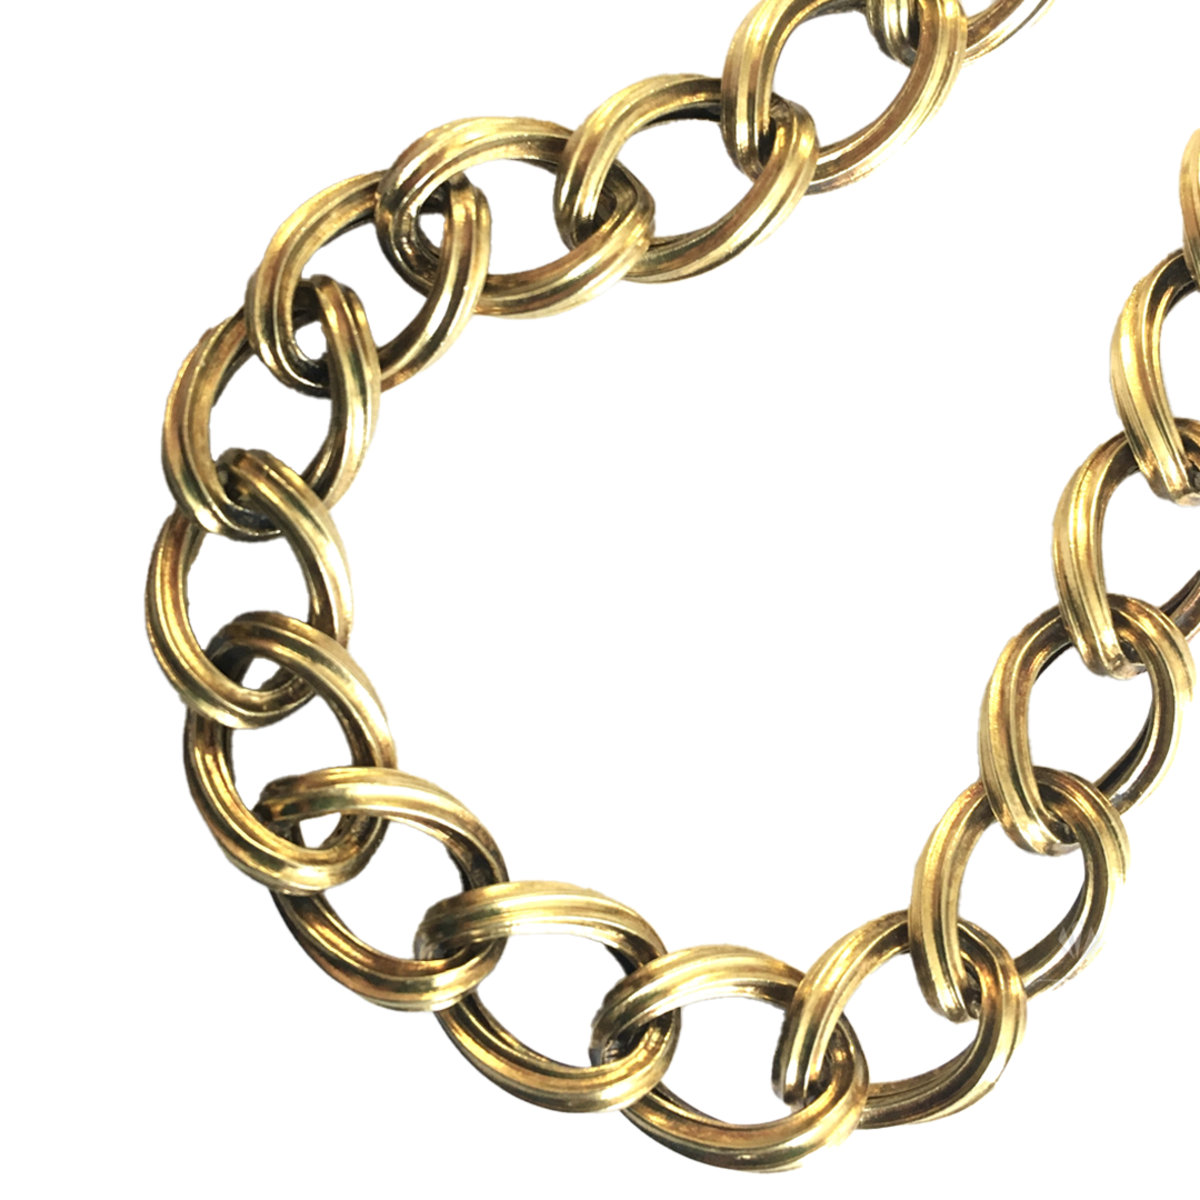 Antique 18KT Yellow Gold Chain Link Necklace close-up details